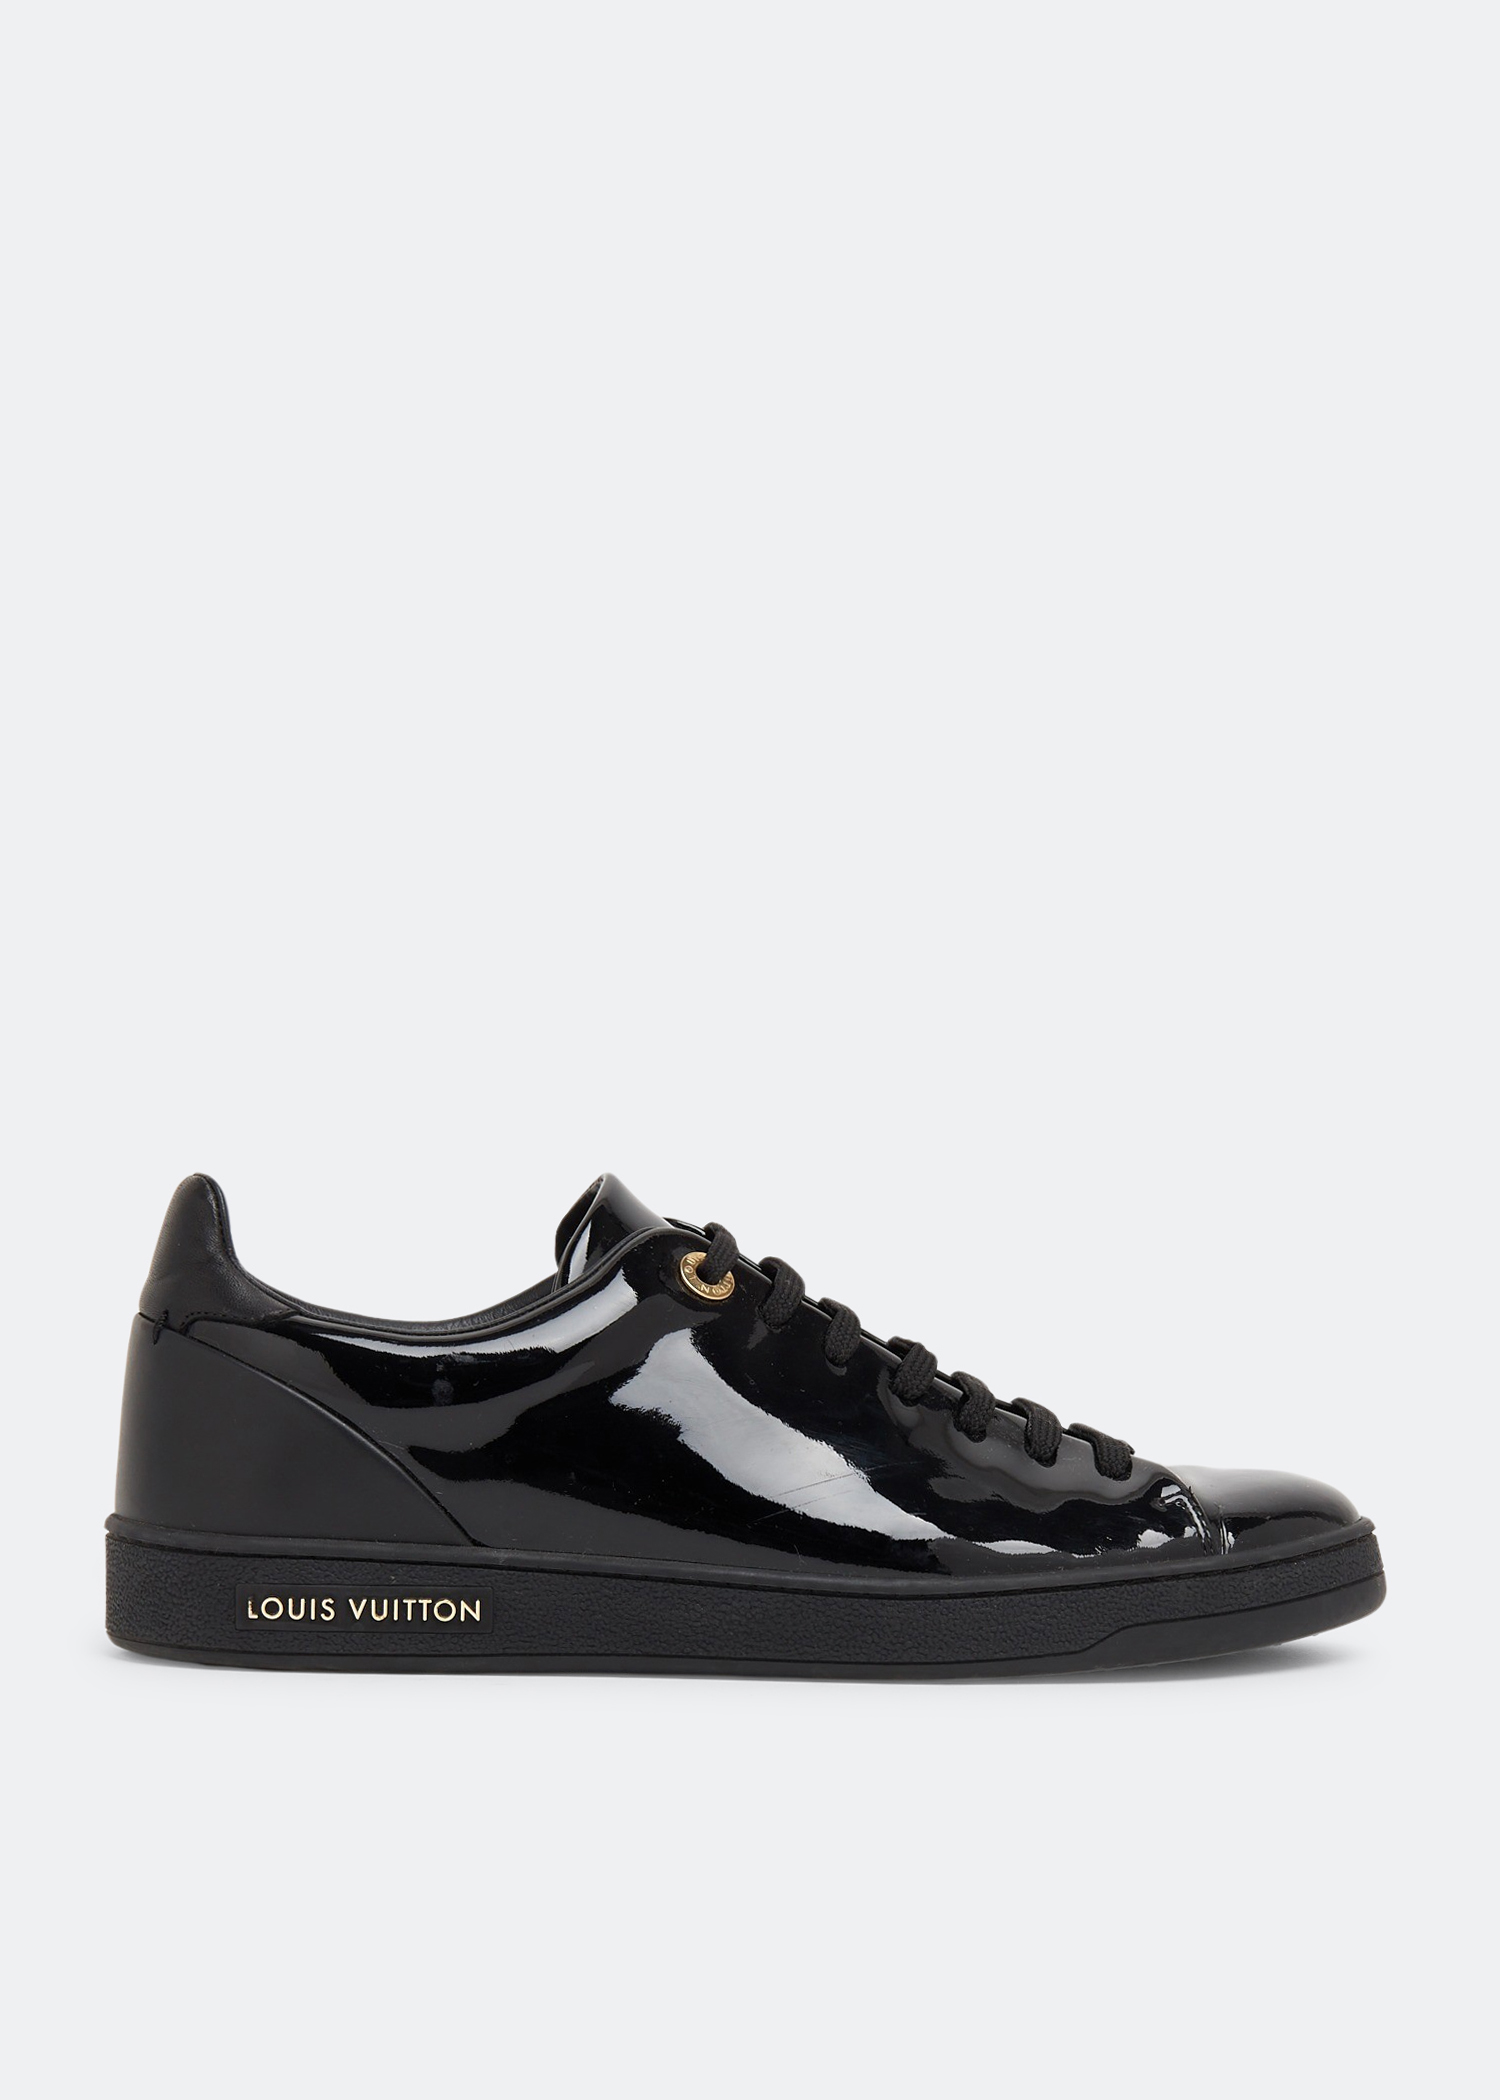 Lv trainer patent leather low trainers Louis Vuitton Black size 8